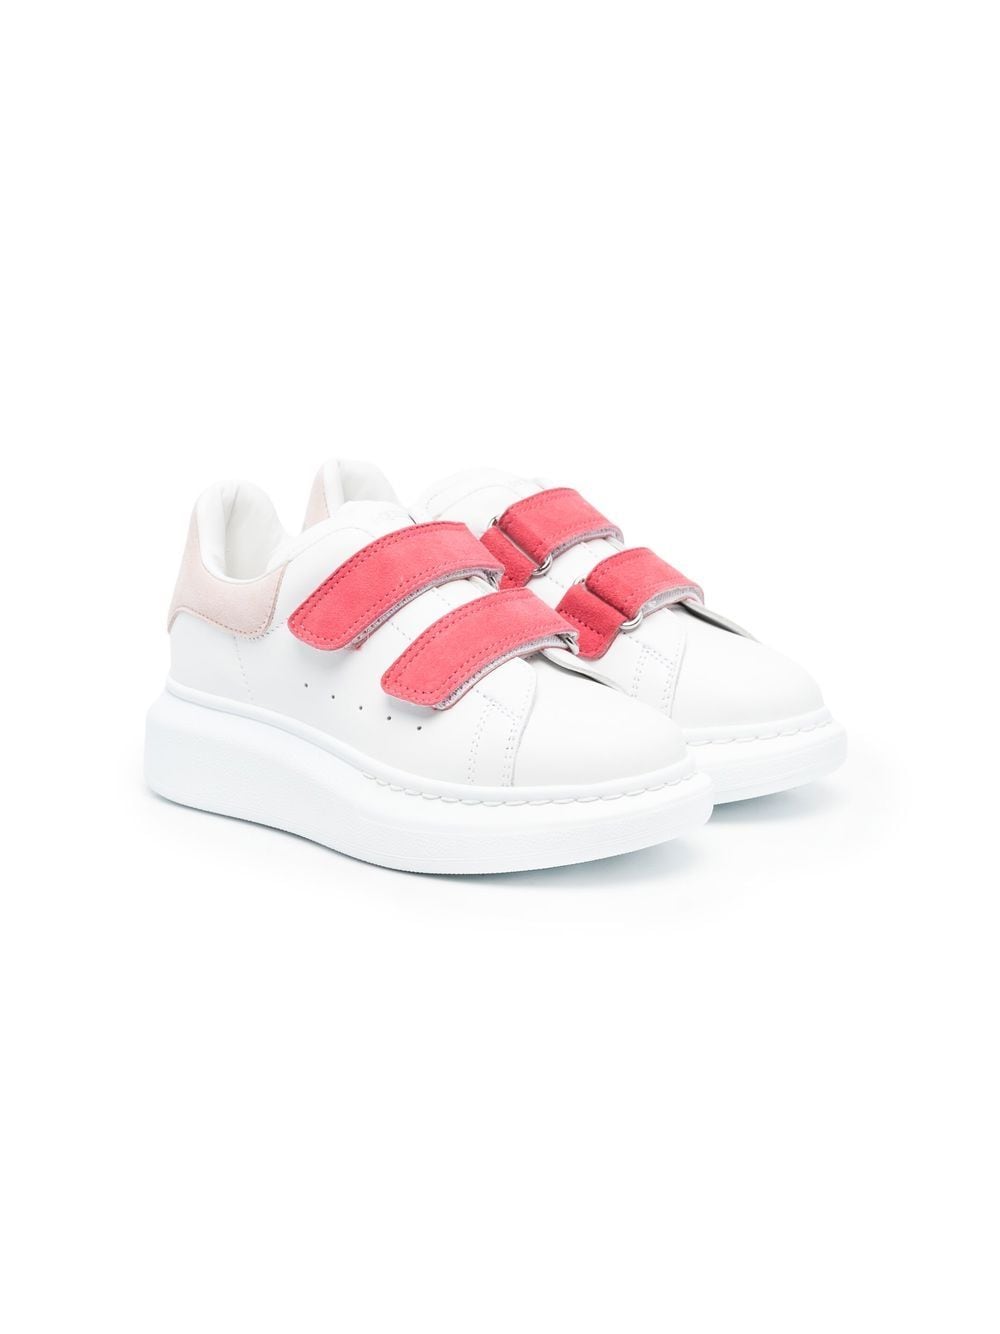 White/pink leather/suede oversized low-top sneakers